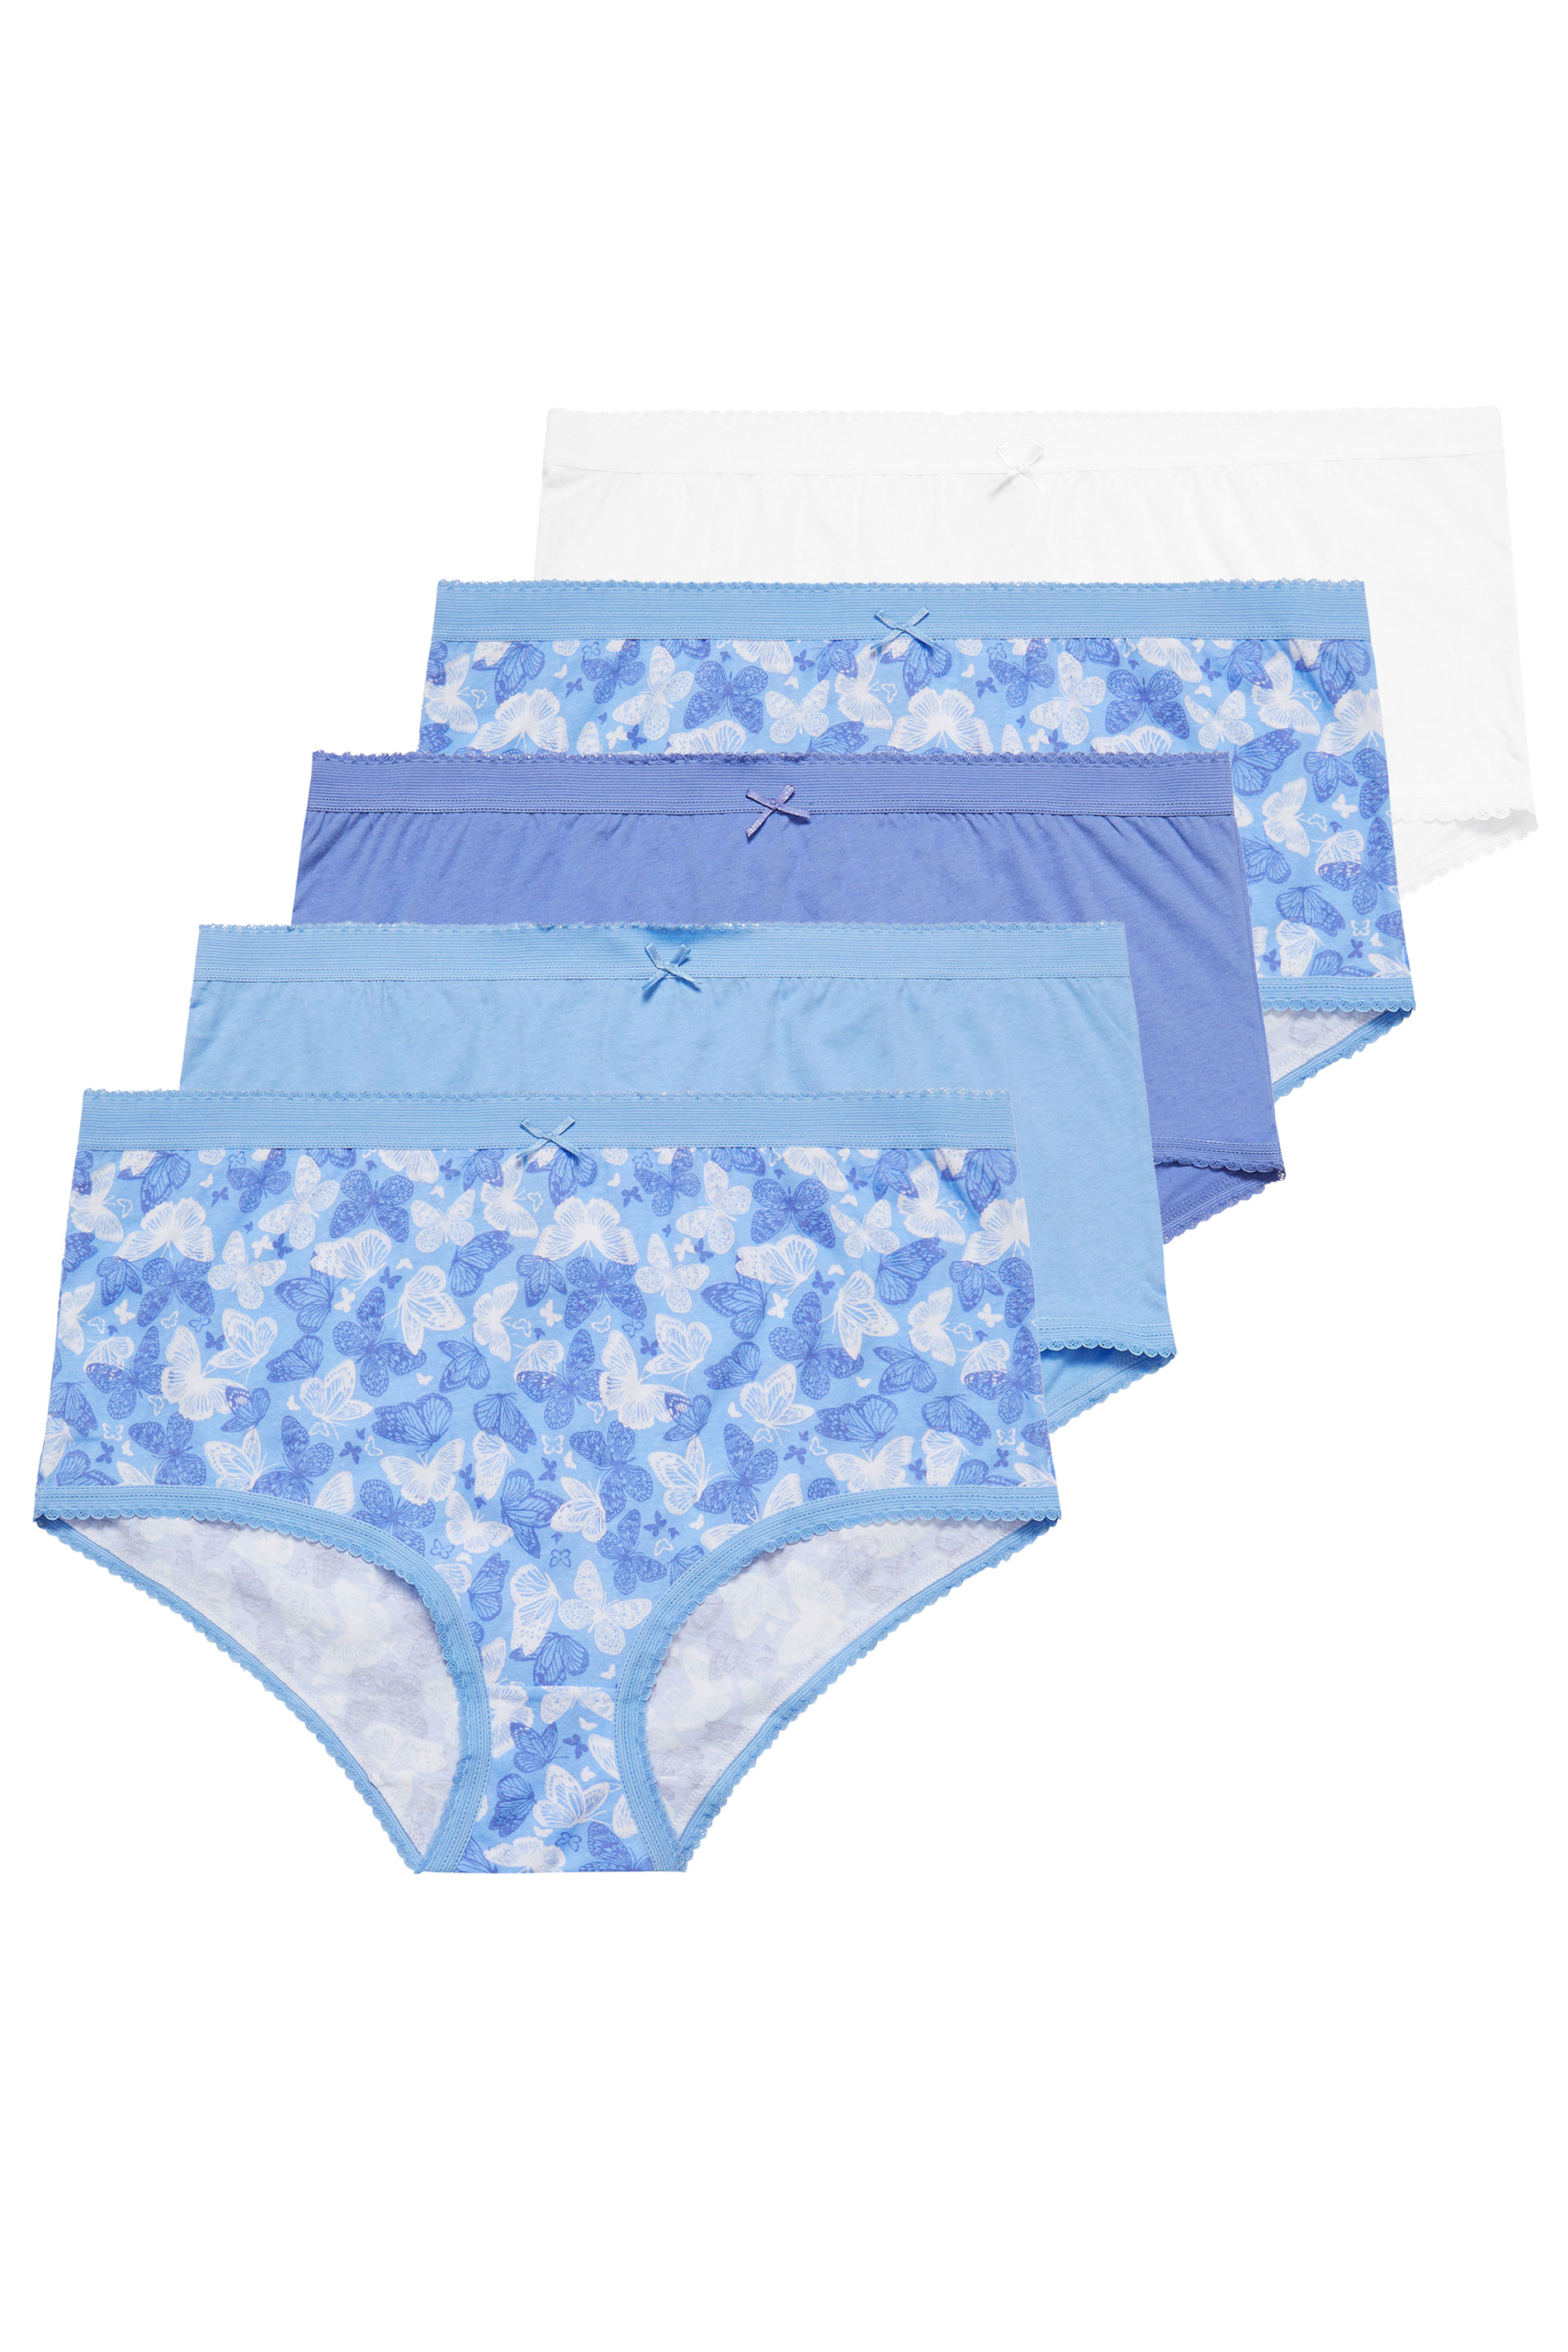 YOURS 5 PACK Plus Size Blue & White Butterfly Design High Waisted Full Briefs | Yours Clothing 3